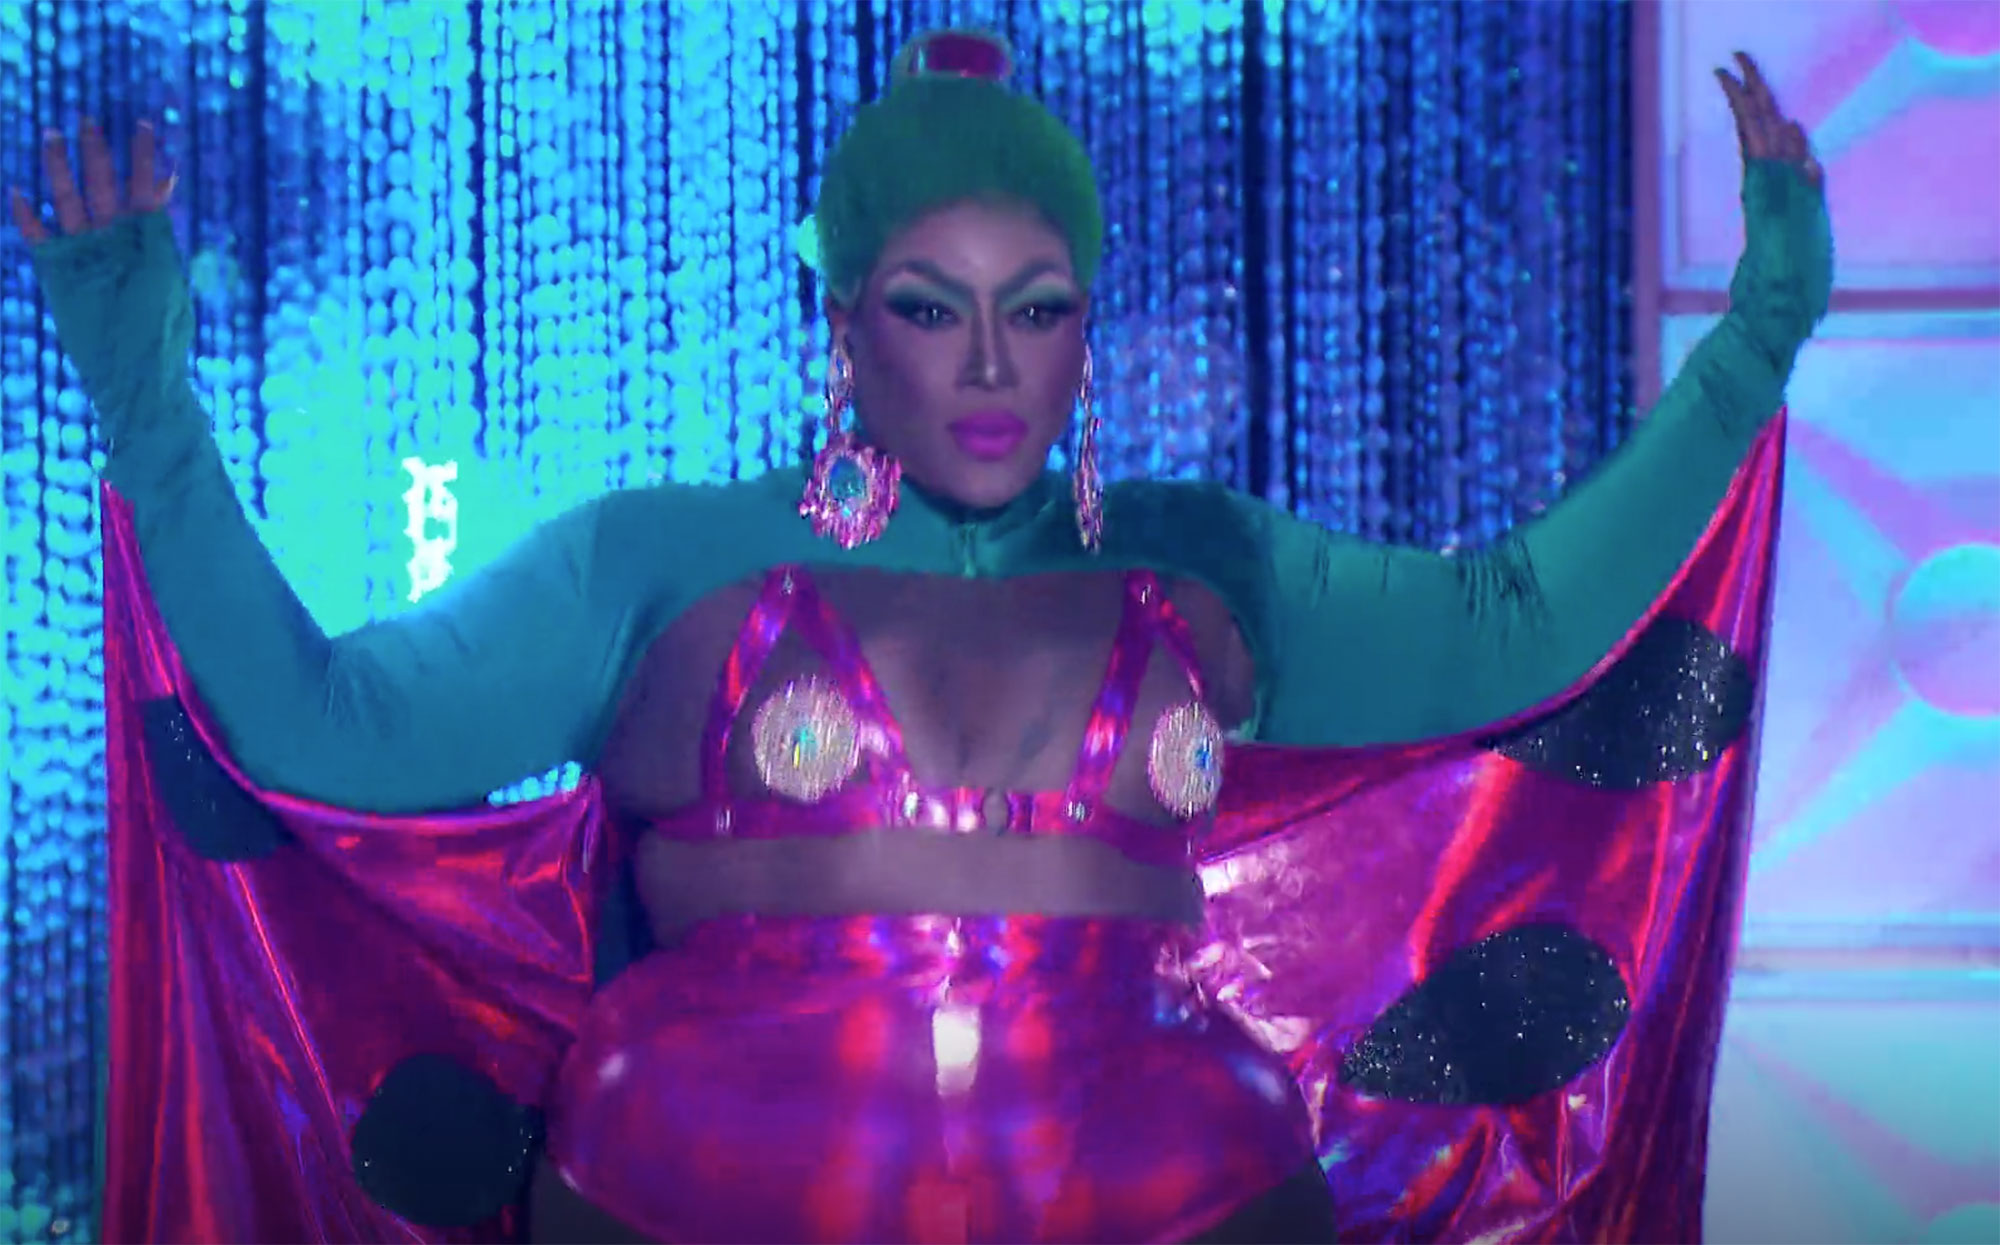 We've finally met the queen taking home the prize in 'RuPaul's Drag Race' season 12, so it's time to look back. And by that, we mean on the trash lewks.